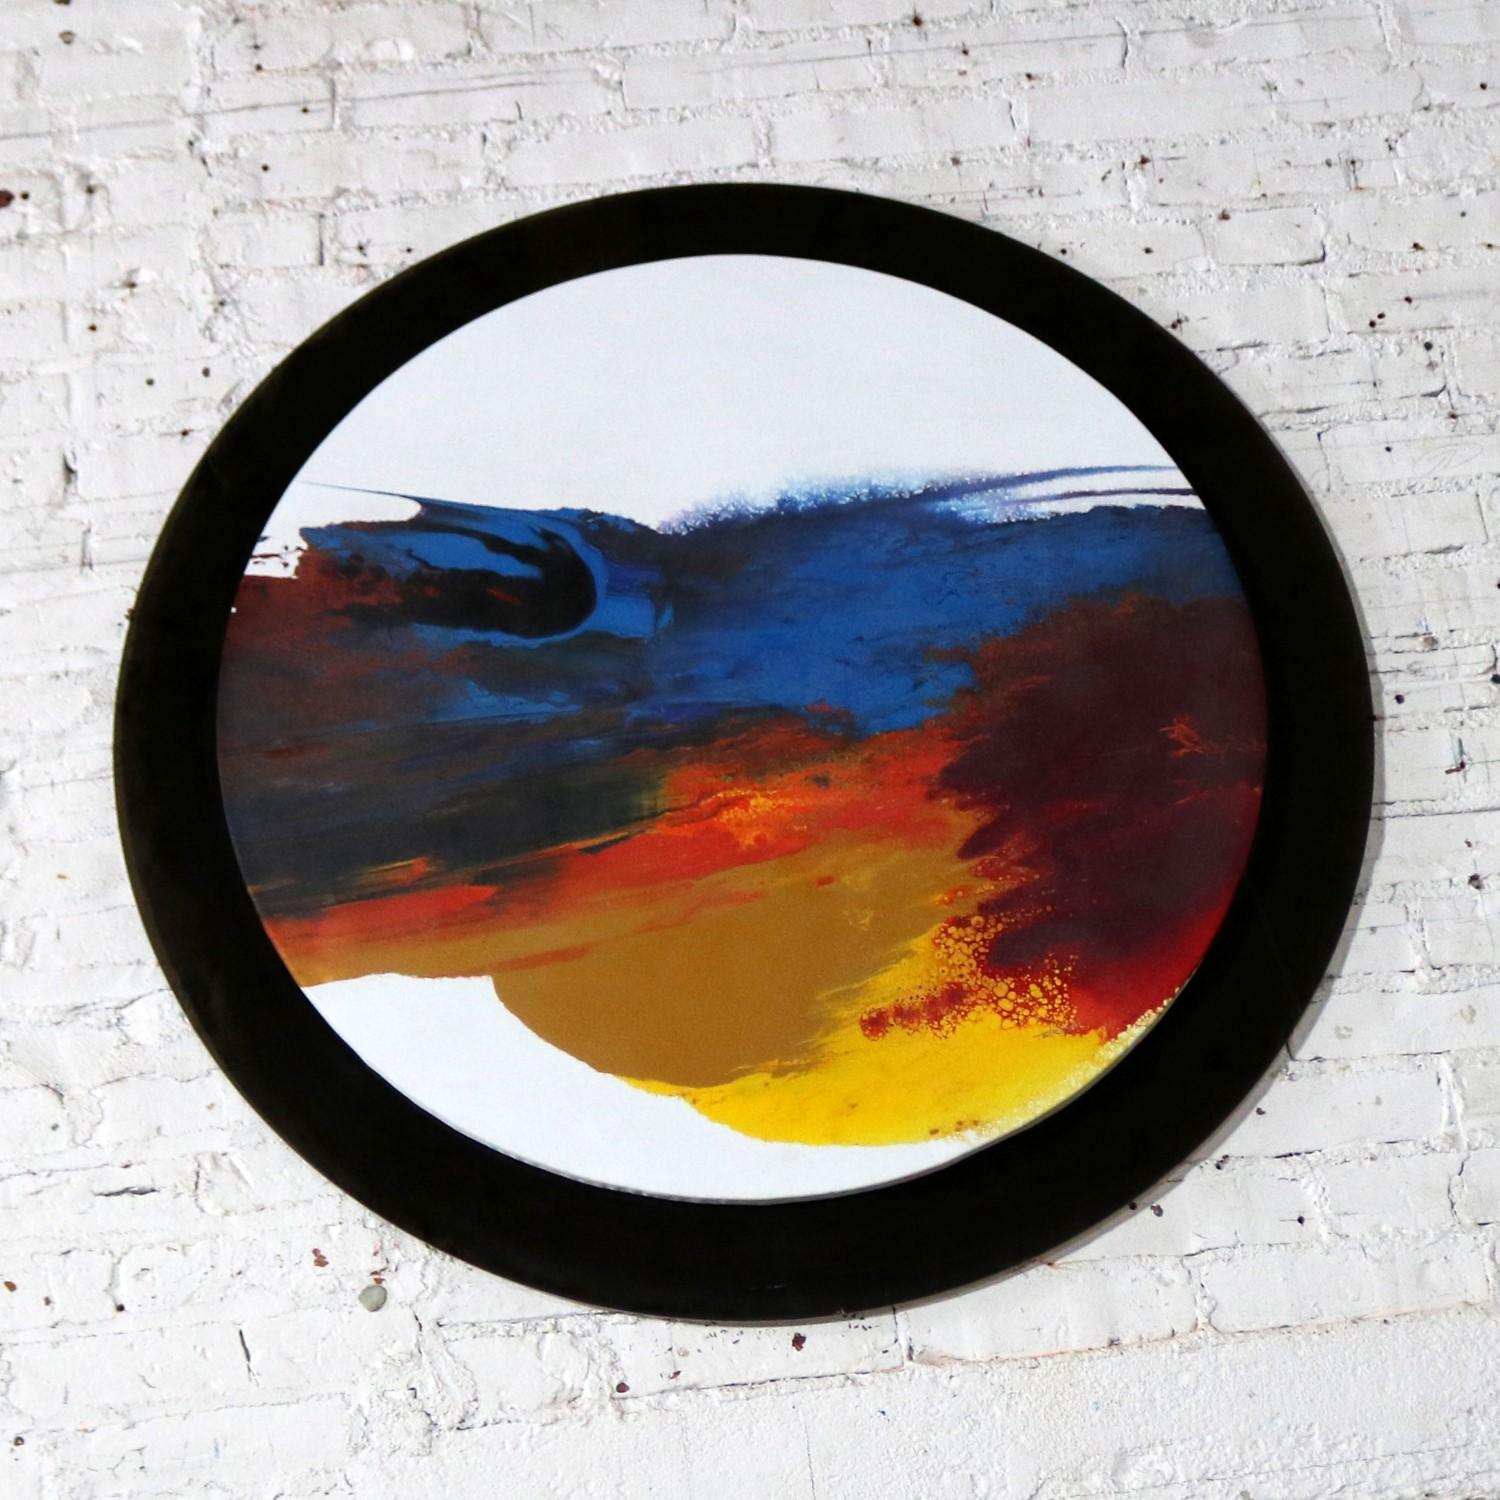 American Abstract Round Acrylic Canvas Painting Mounted Smoke Plexiglass by Ted R. Lownik For Sale